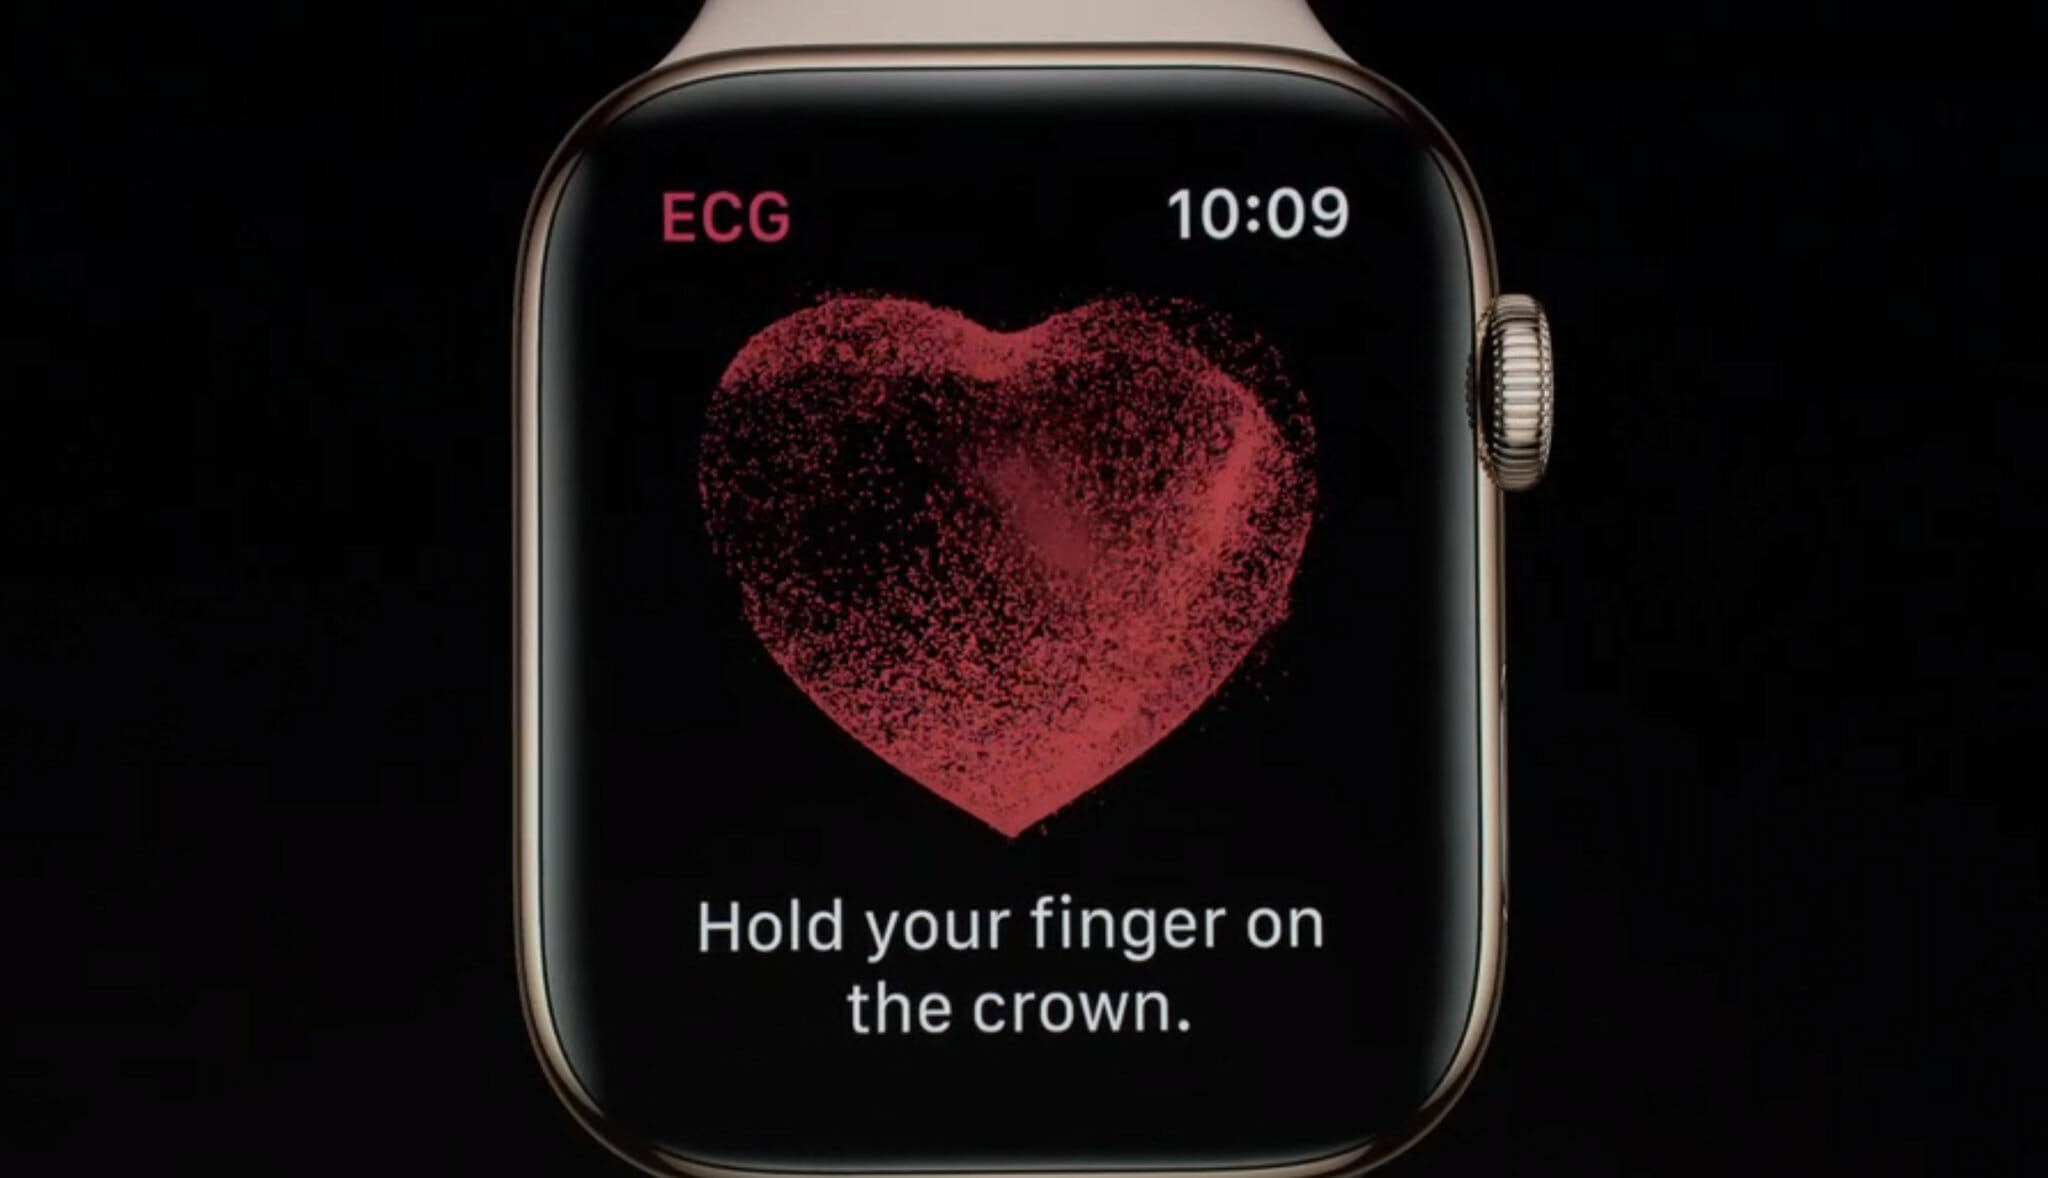 A new Apple Watch 4 is ready to take an electrocardiogram.